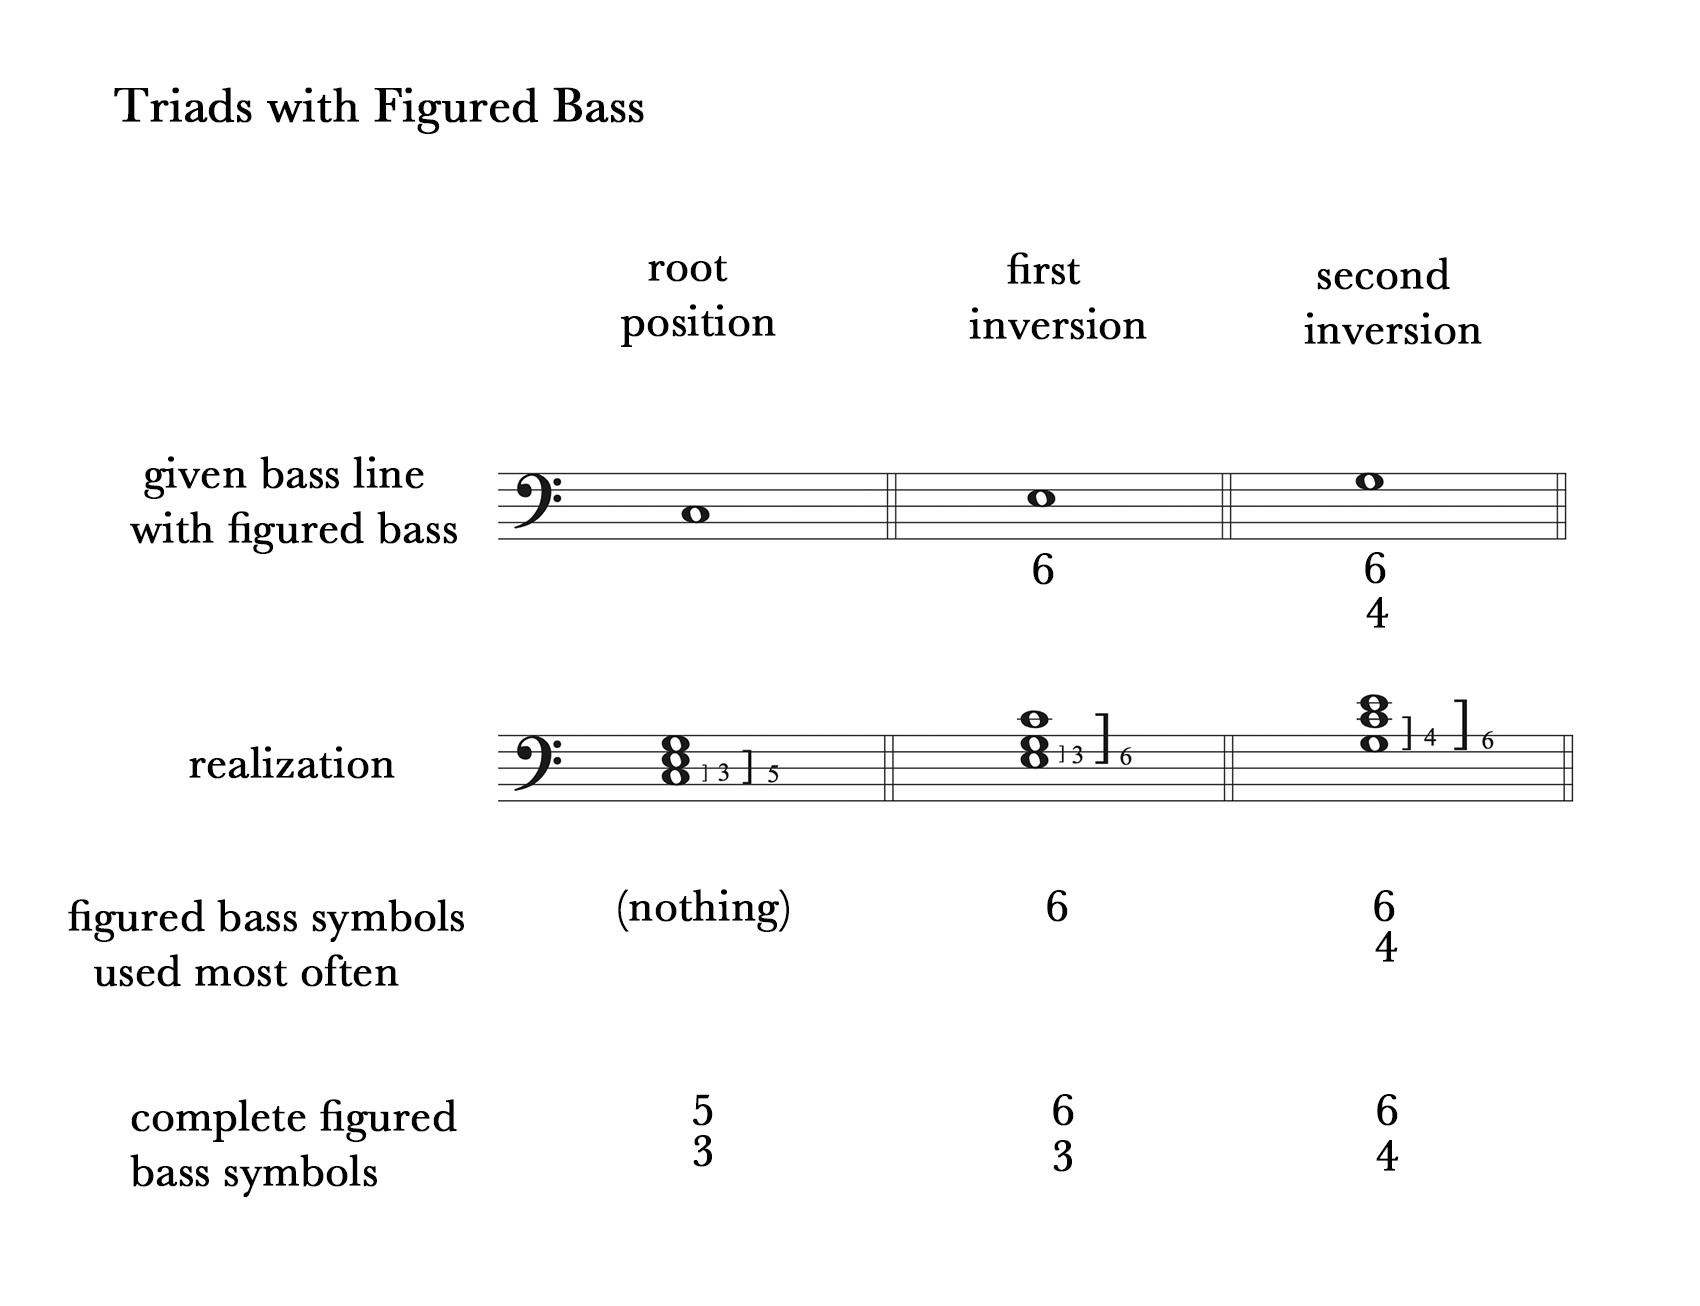 Chart showing figured bass symbols used for triads in inversions.